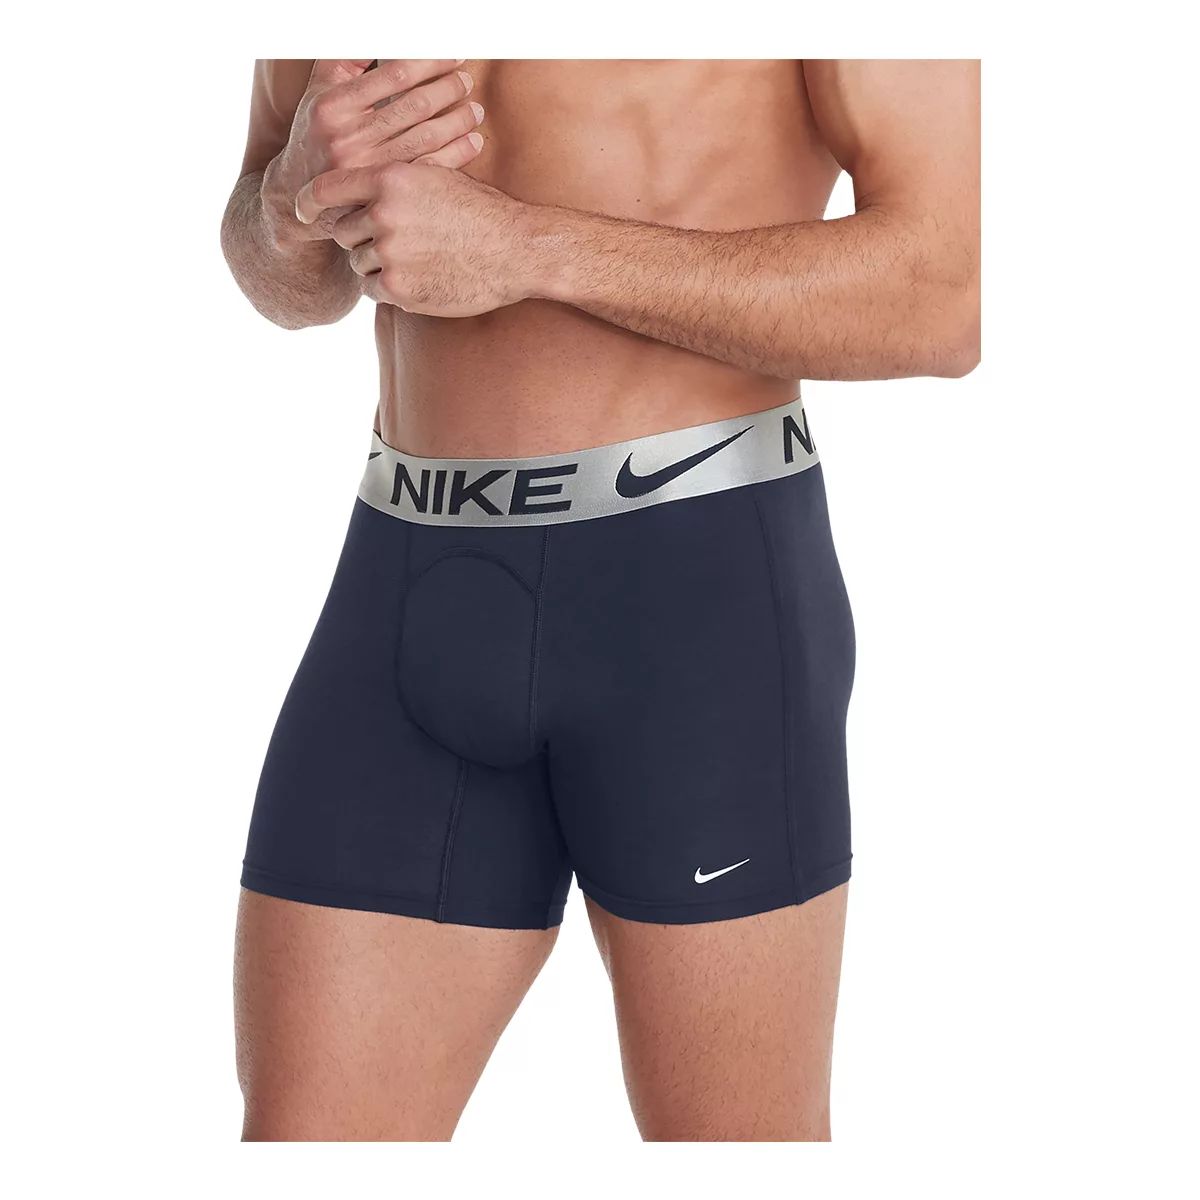 Nike Luxe Cotton Modal Boxer Briefs - Full Review 